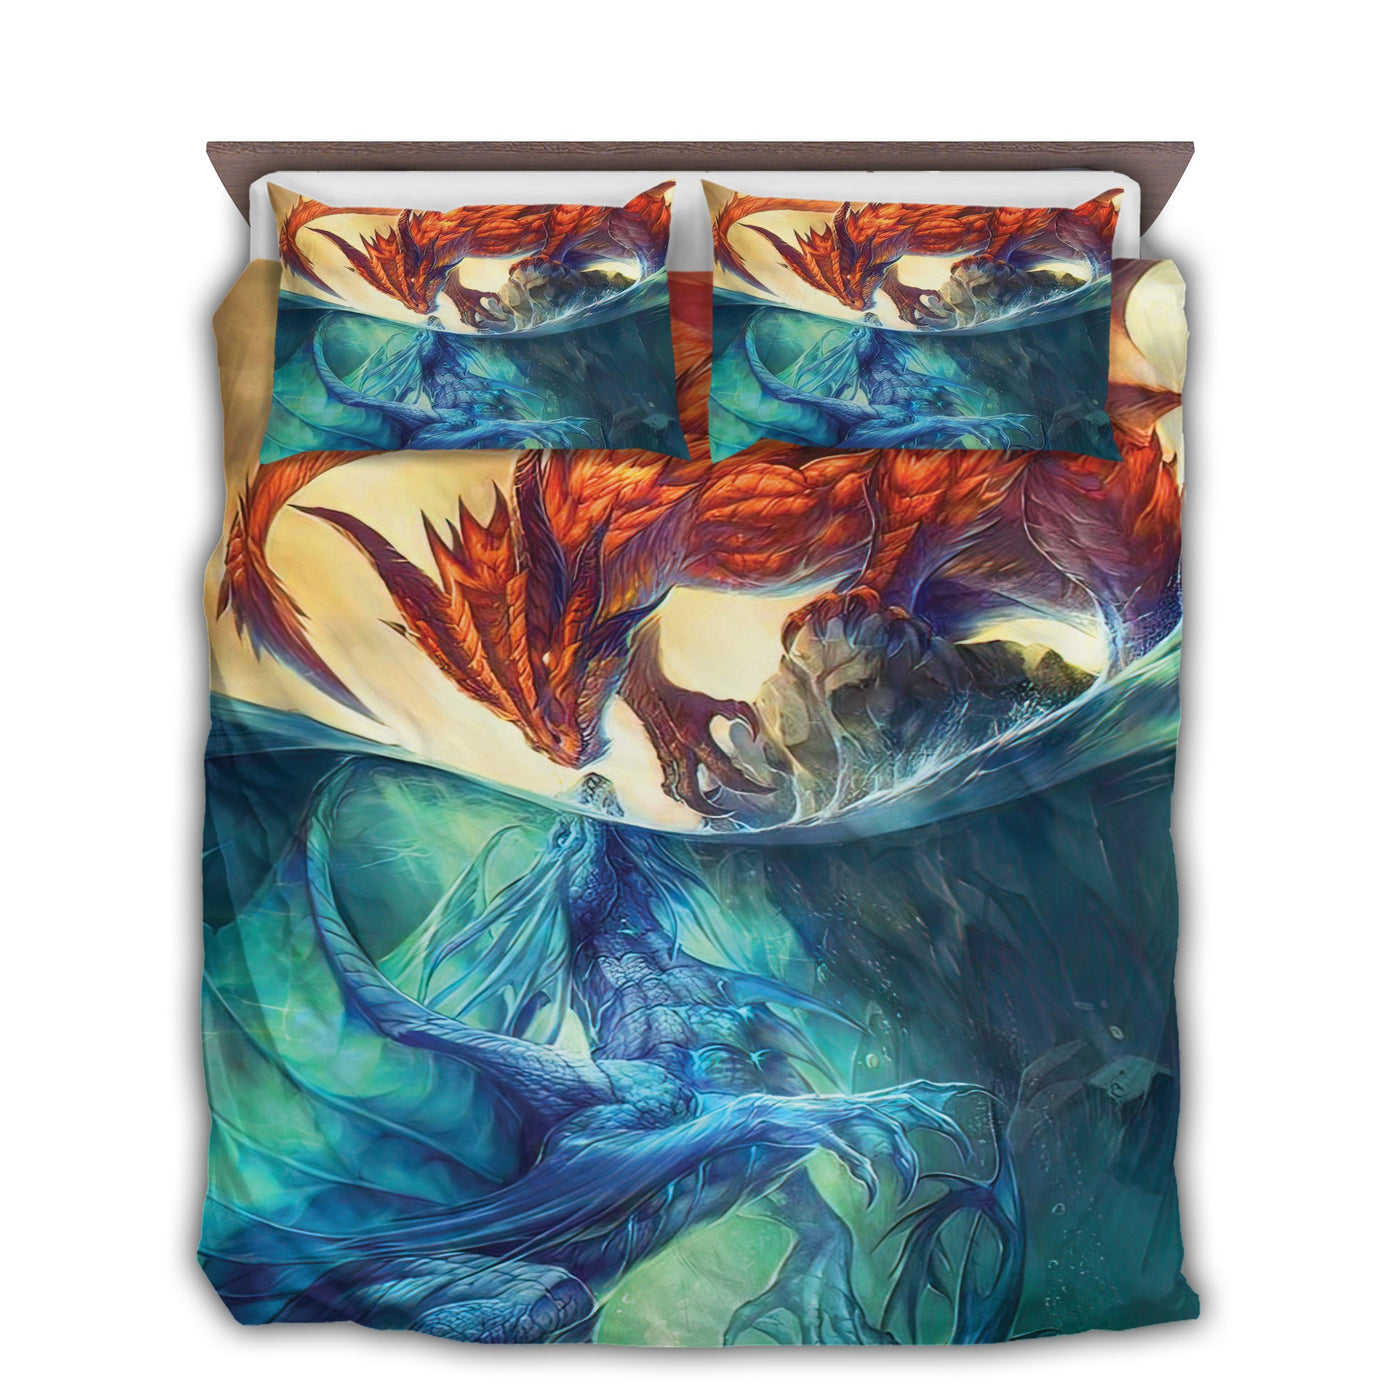 US / Twin (68" x 86") Dragon Fight Water And Fire - Bedding Cover - Owls Matrix LTD